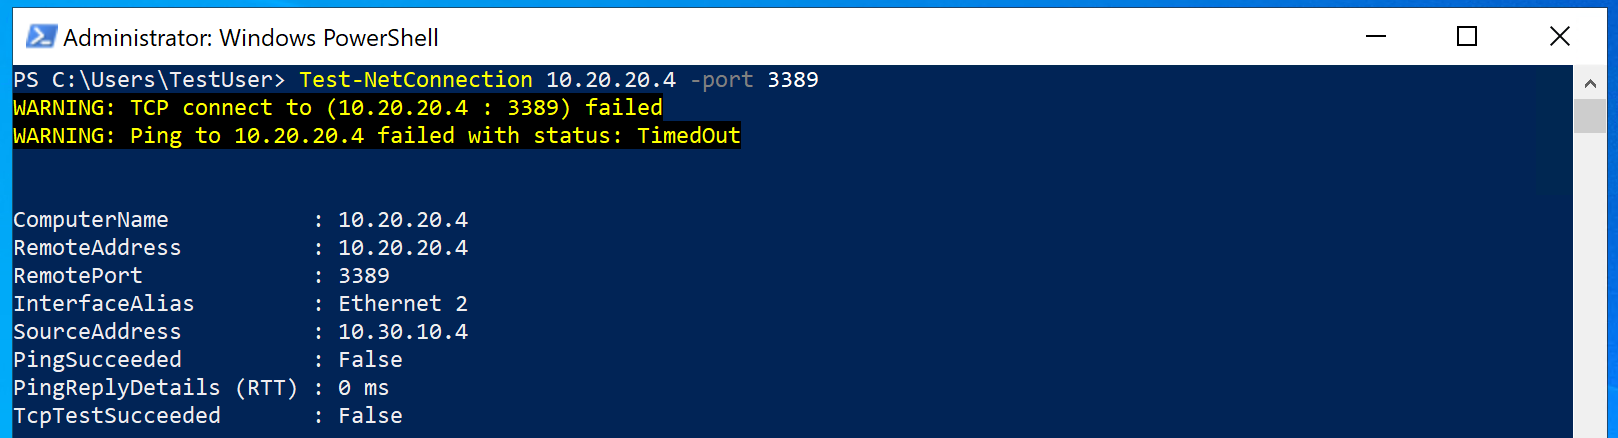 PowerShell window with Test-NetConnection 10.20.20.4 -port 3389 showing failed 